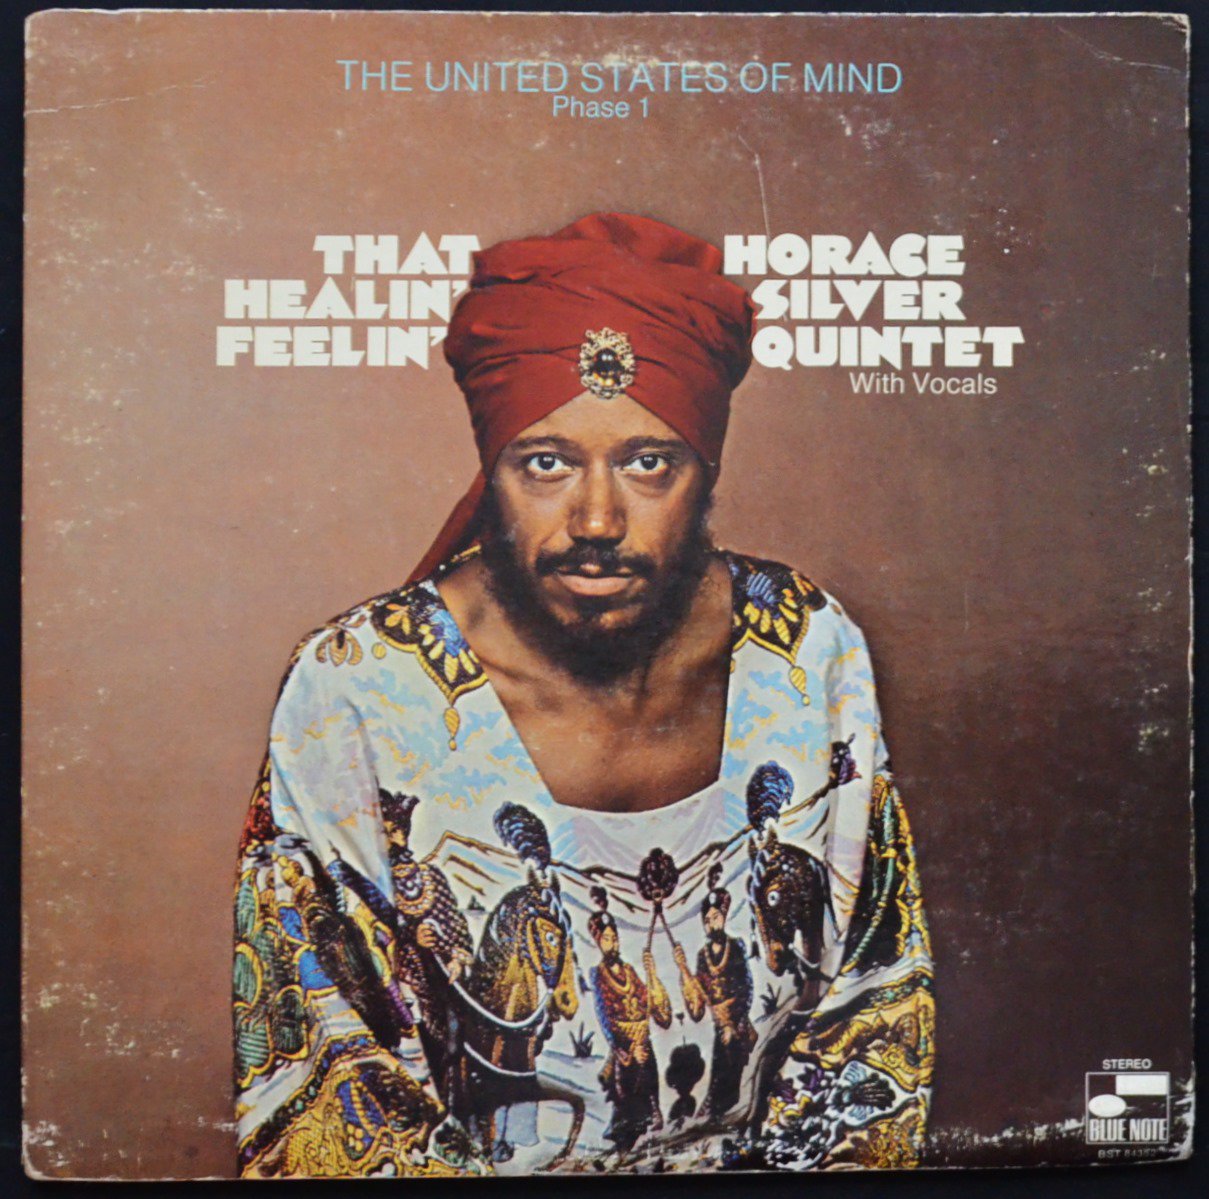 HORACE SILVER QUINTET WITH VOCALS / THAT HEALIN' FEELIN' (THE